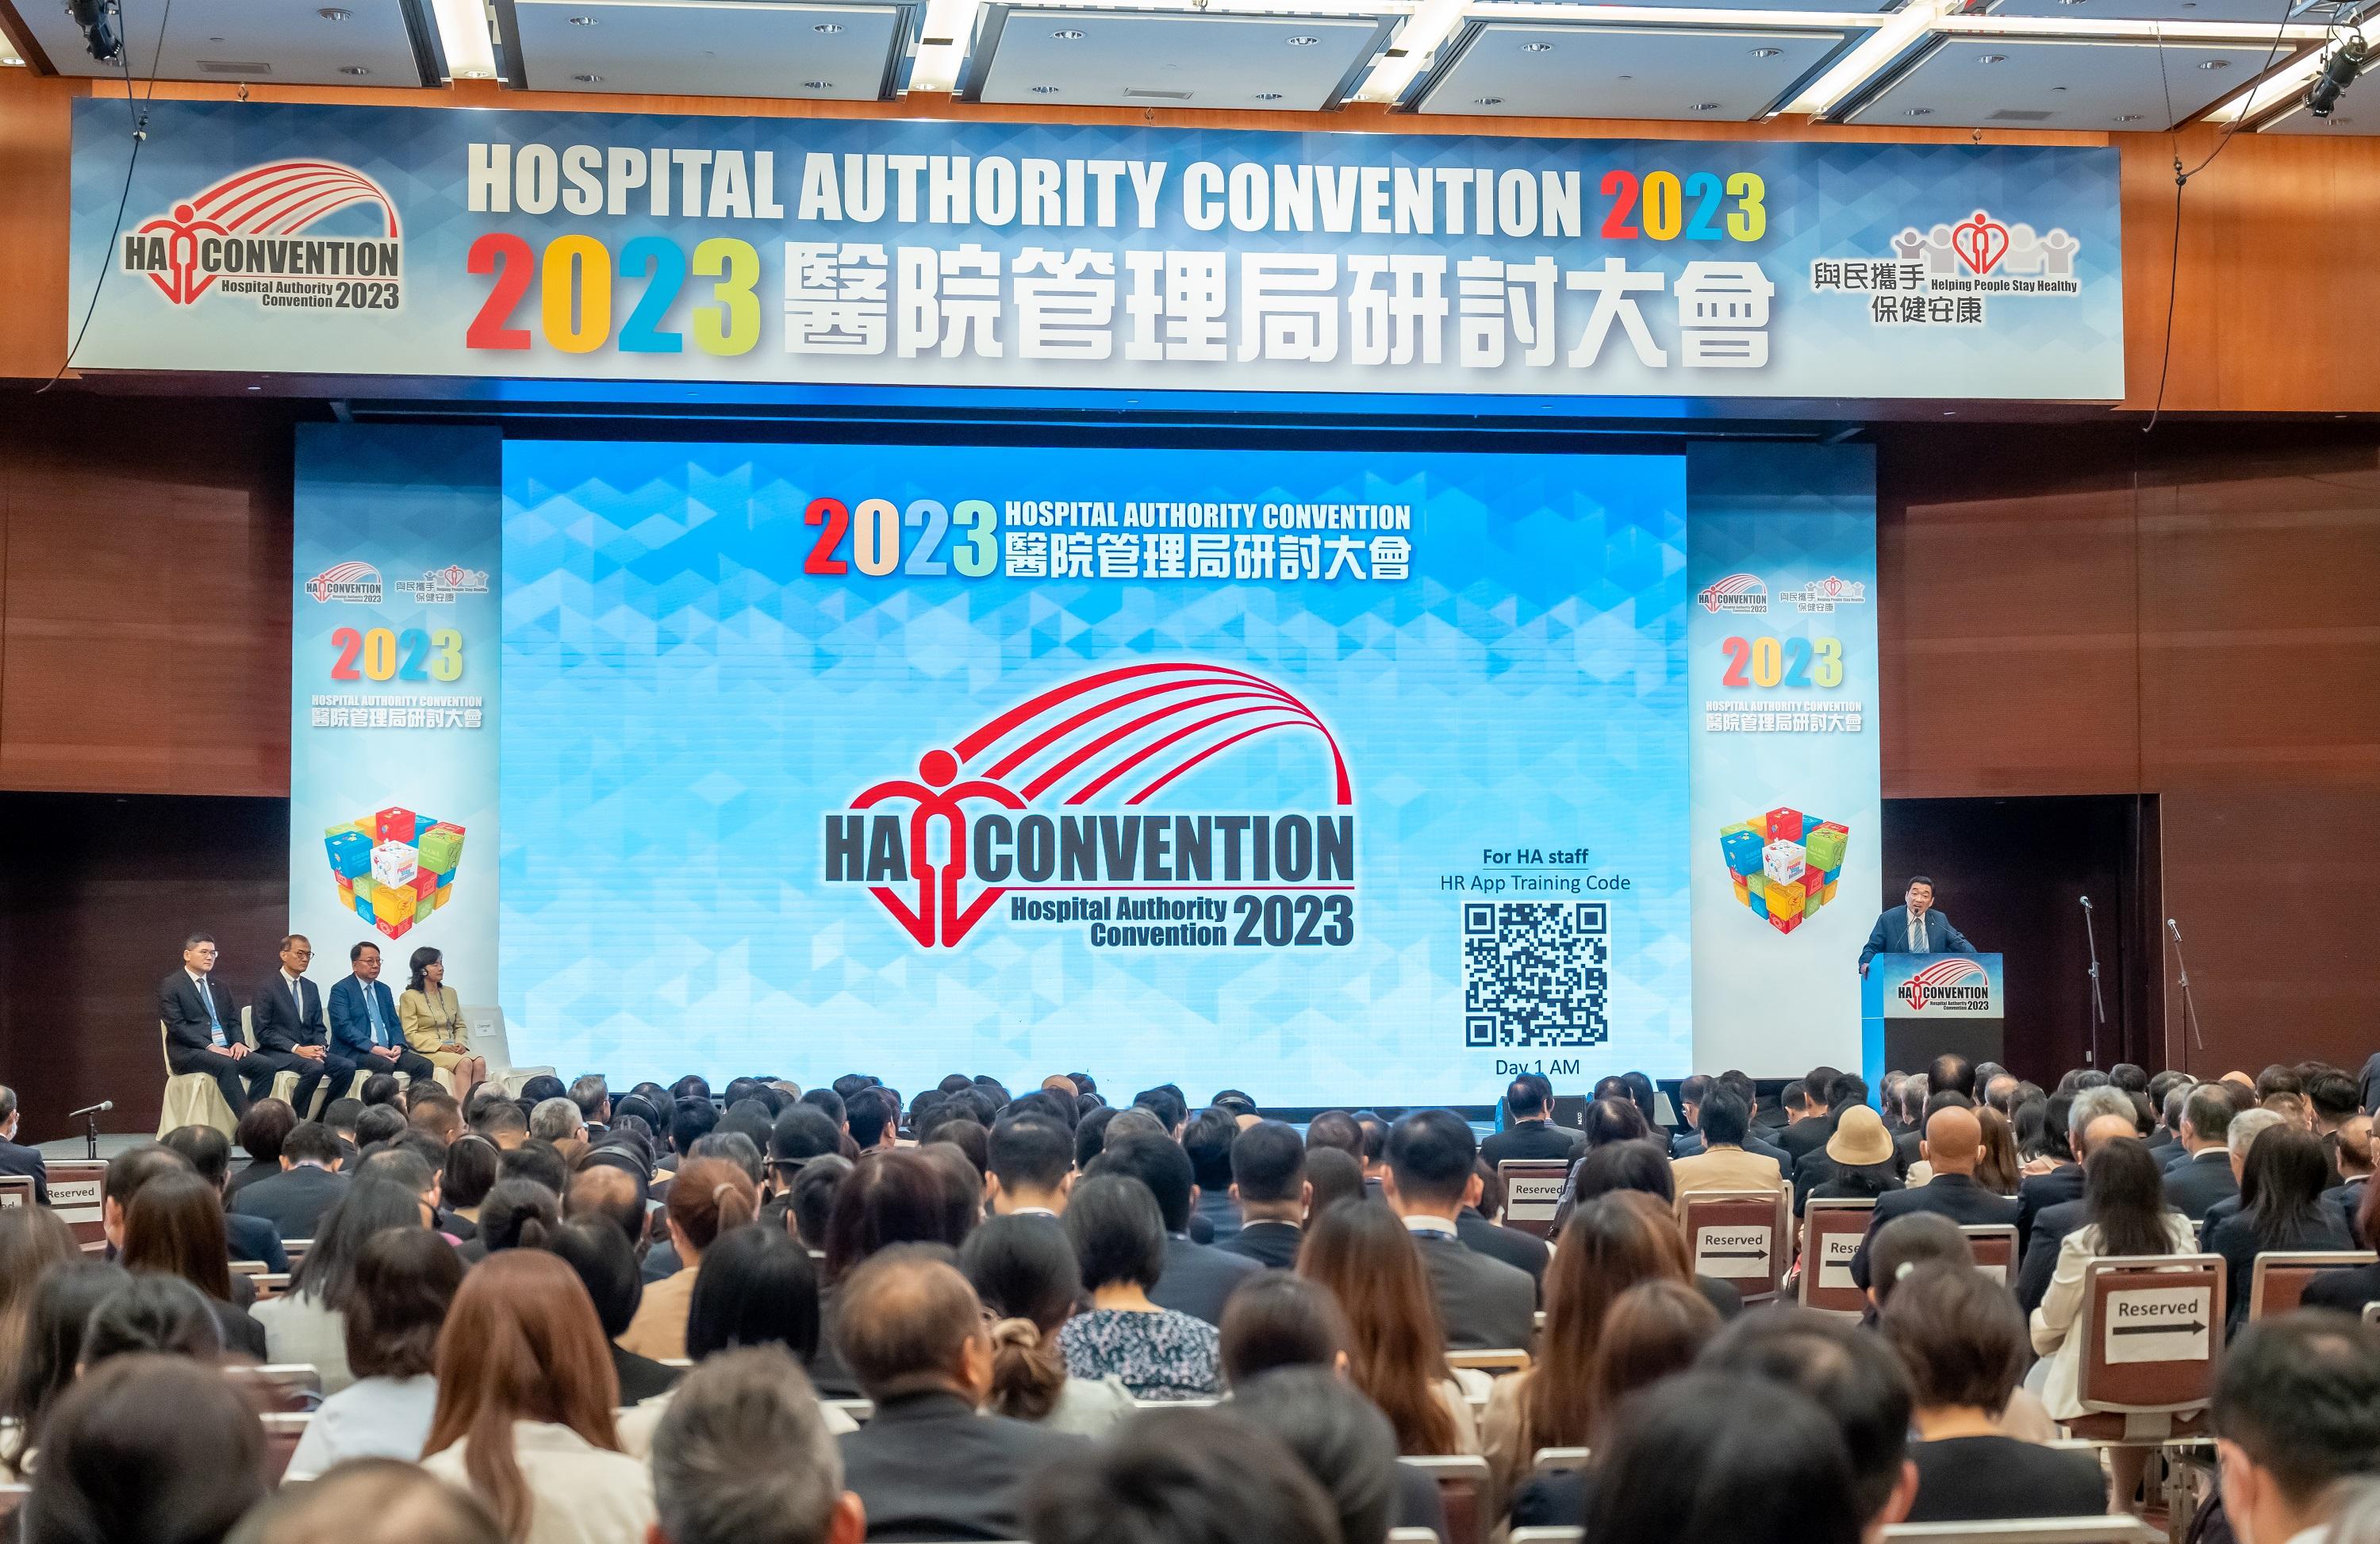 The Hospital Authority Convention 2023 is being held in both physical and virtual formats today and tomorrow (May 16 and 17), with around 120 distinguished speakers sharing their knowledge and insights on various health topics of interest with over 6 000 healthcare and academic professionals.